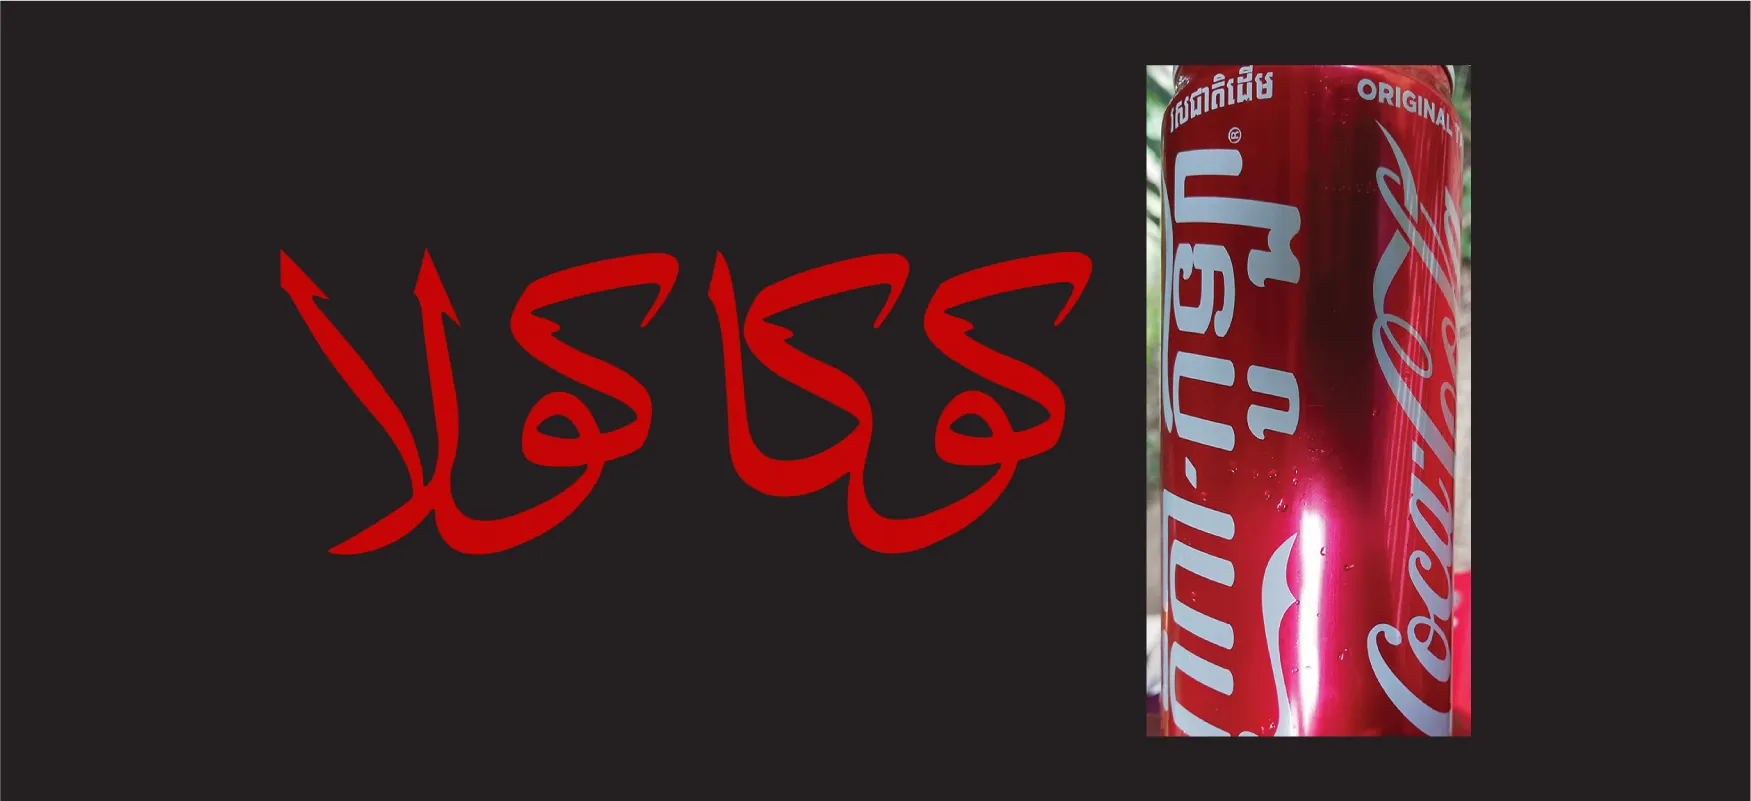 On the left in red ink on a white background the Arabic word for “Coca-Cola” is shown. On the right, a picture of a red can is shown. The words “Coca-Cola” are written in cursive on the right side in white going from the bottom to the top of the can and the word “Original” is written across the top in English. On the left side of the can are words in the Khmer language.